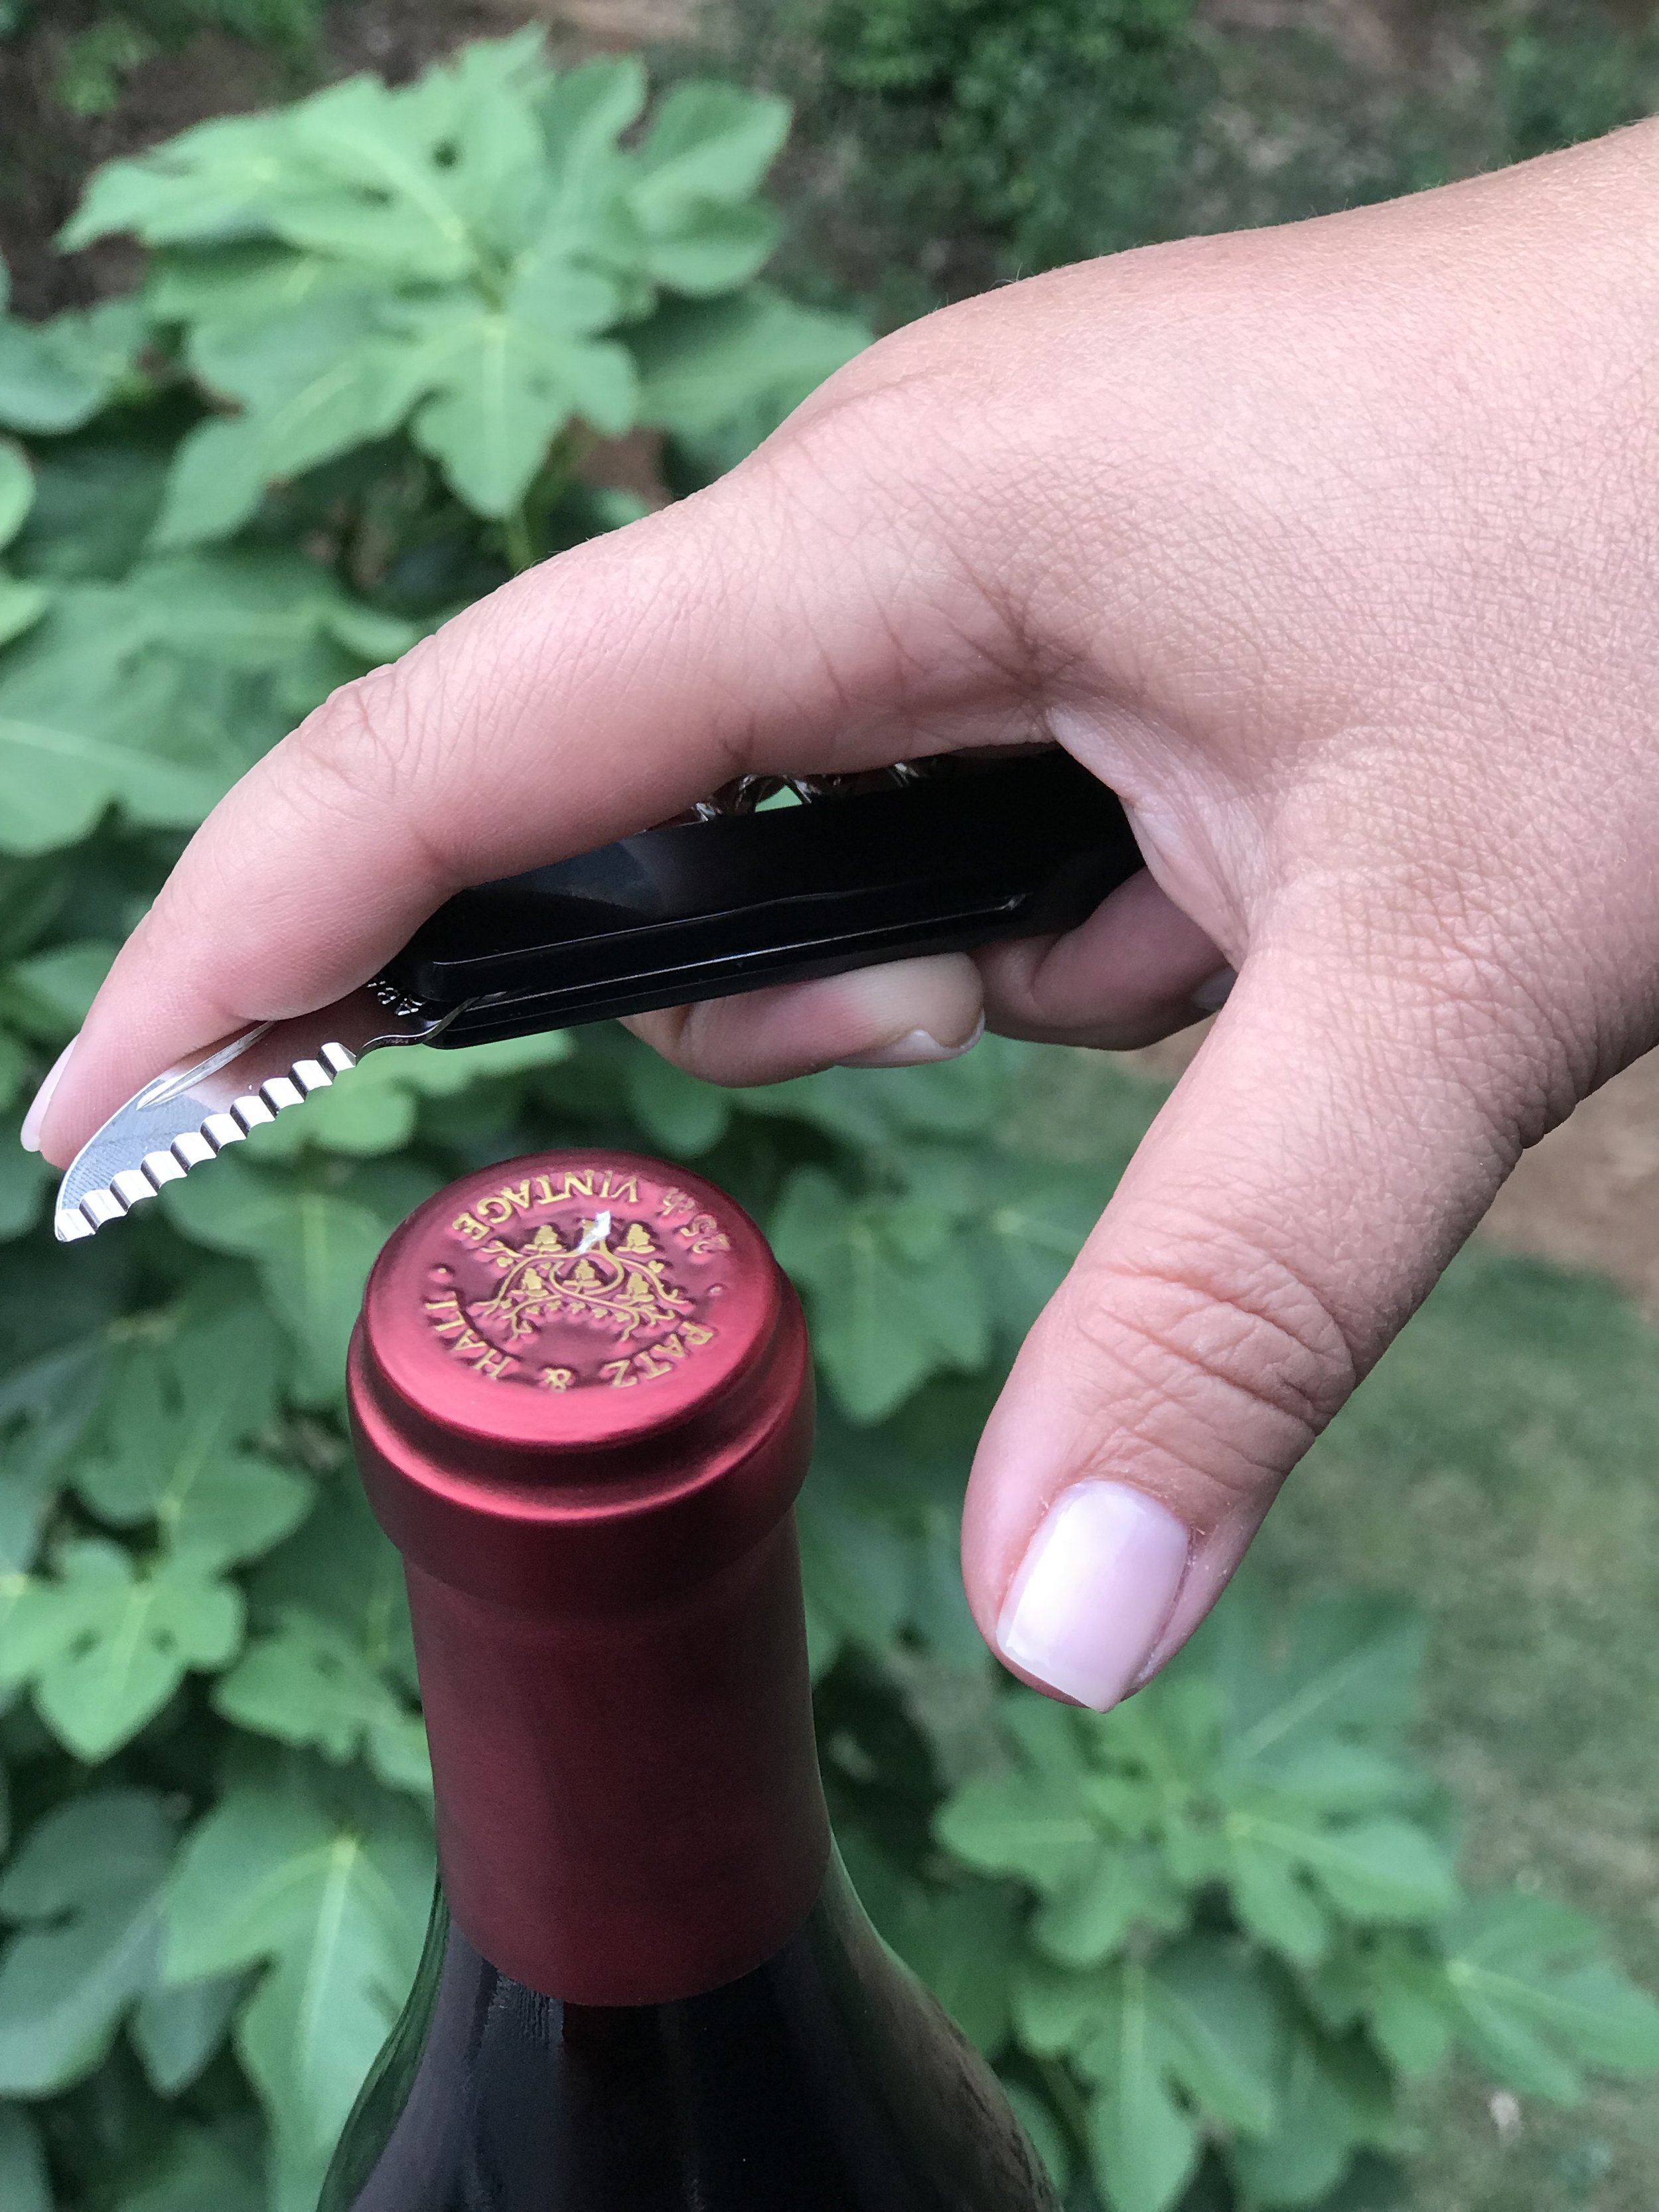 The 6 Best Corkscrews and Wine Openers for 2022 — KnowWines